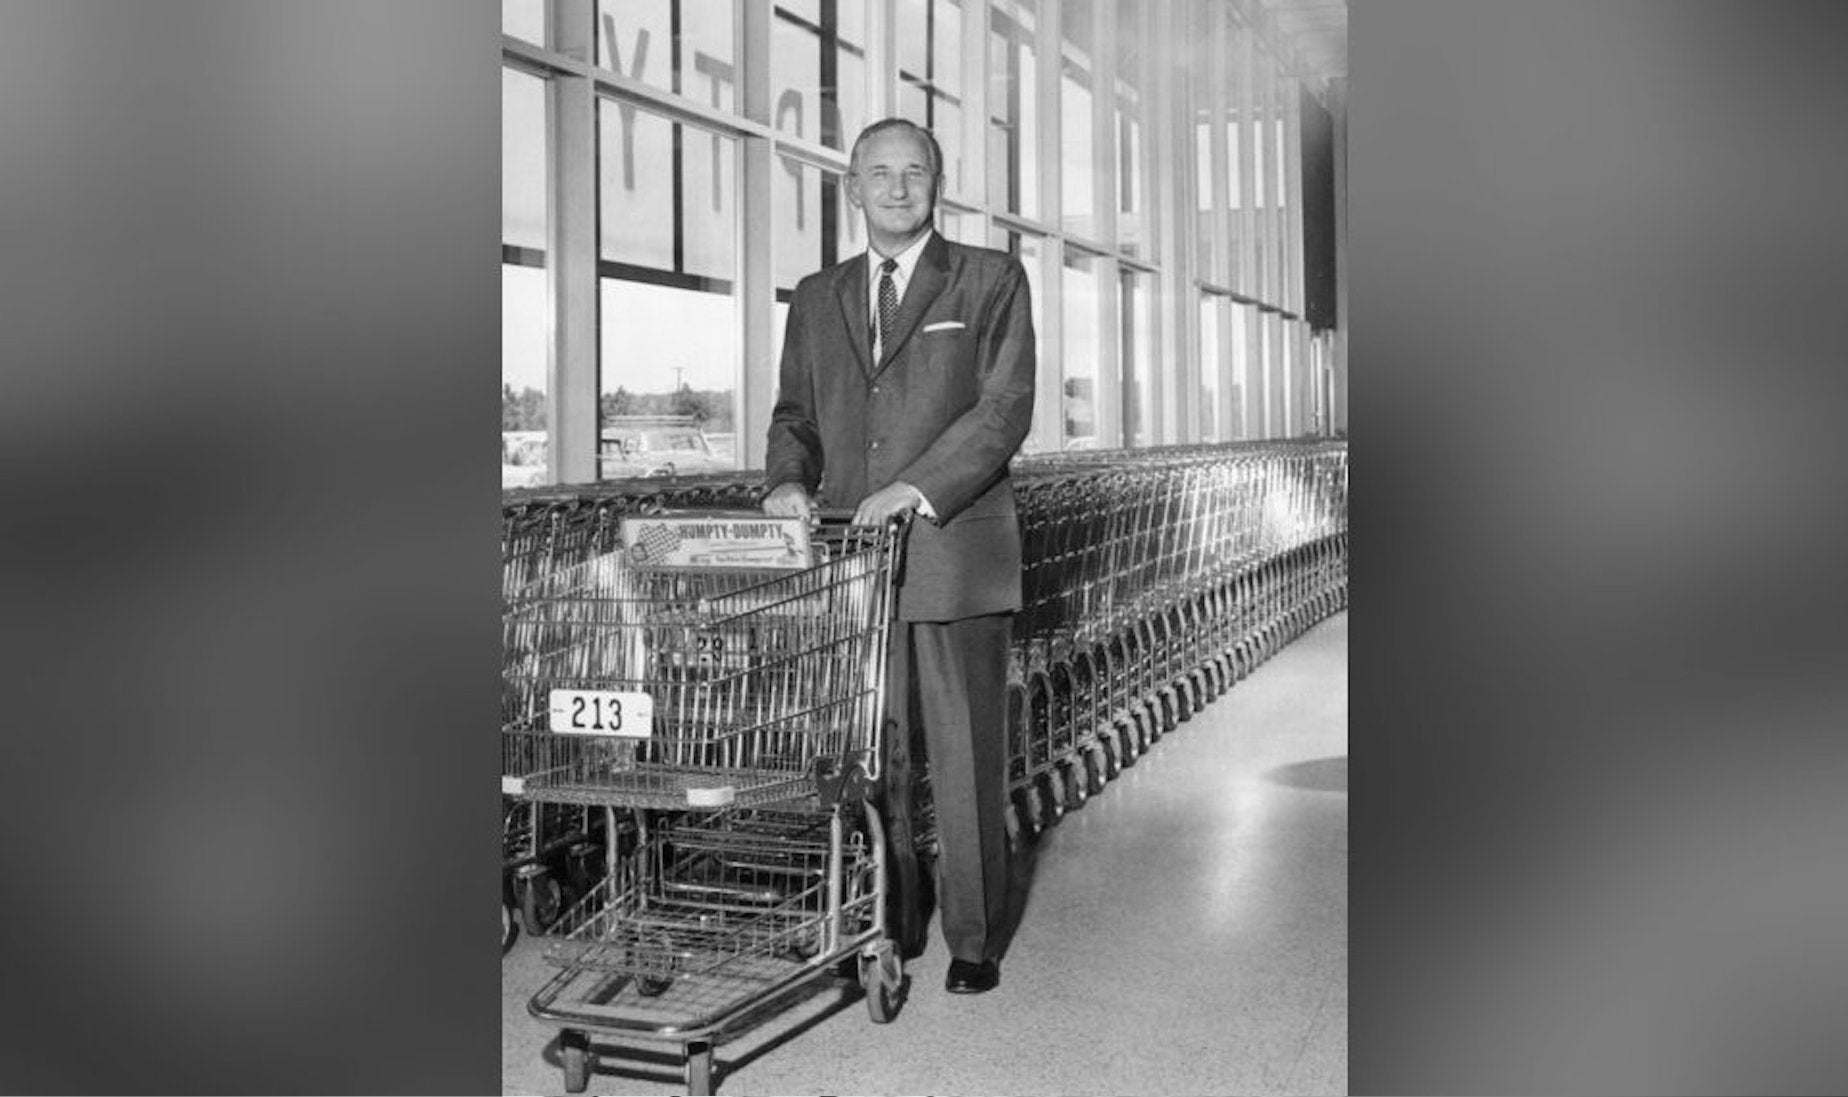 Sylvan N. Goldman, inventor of the shopping cart, is pictured with a shopping cart.